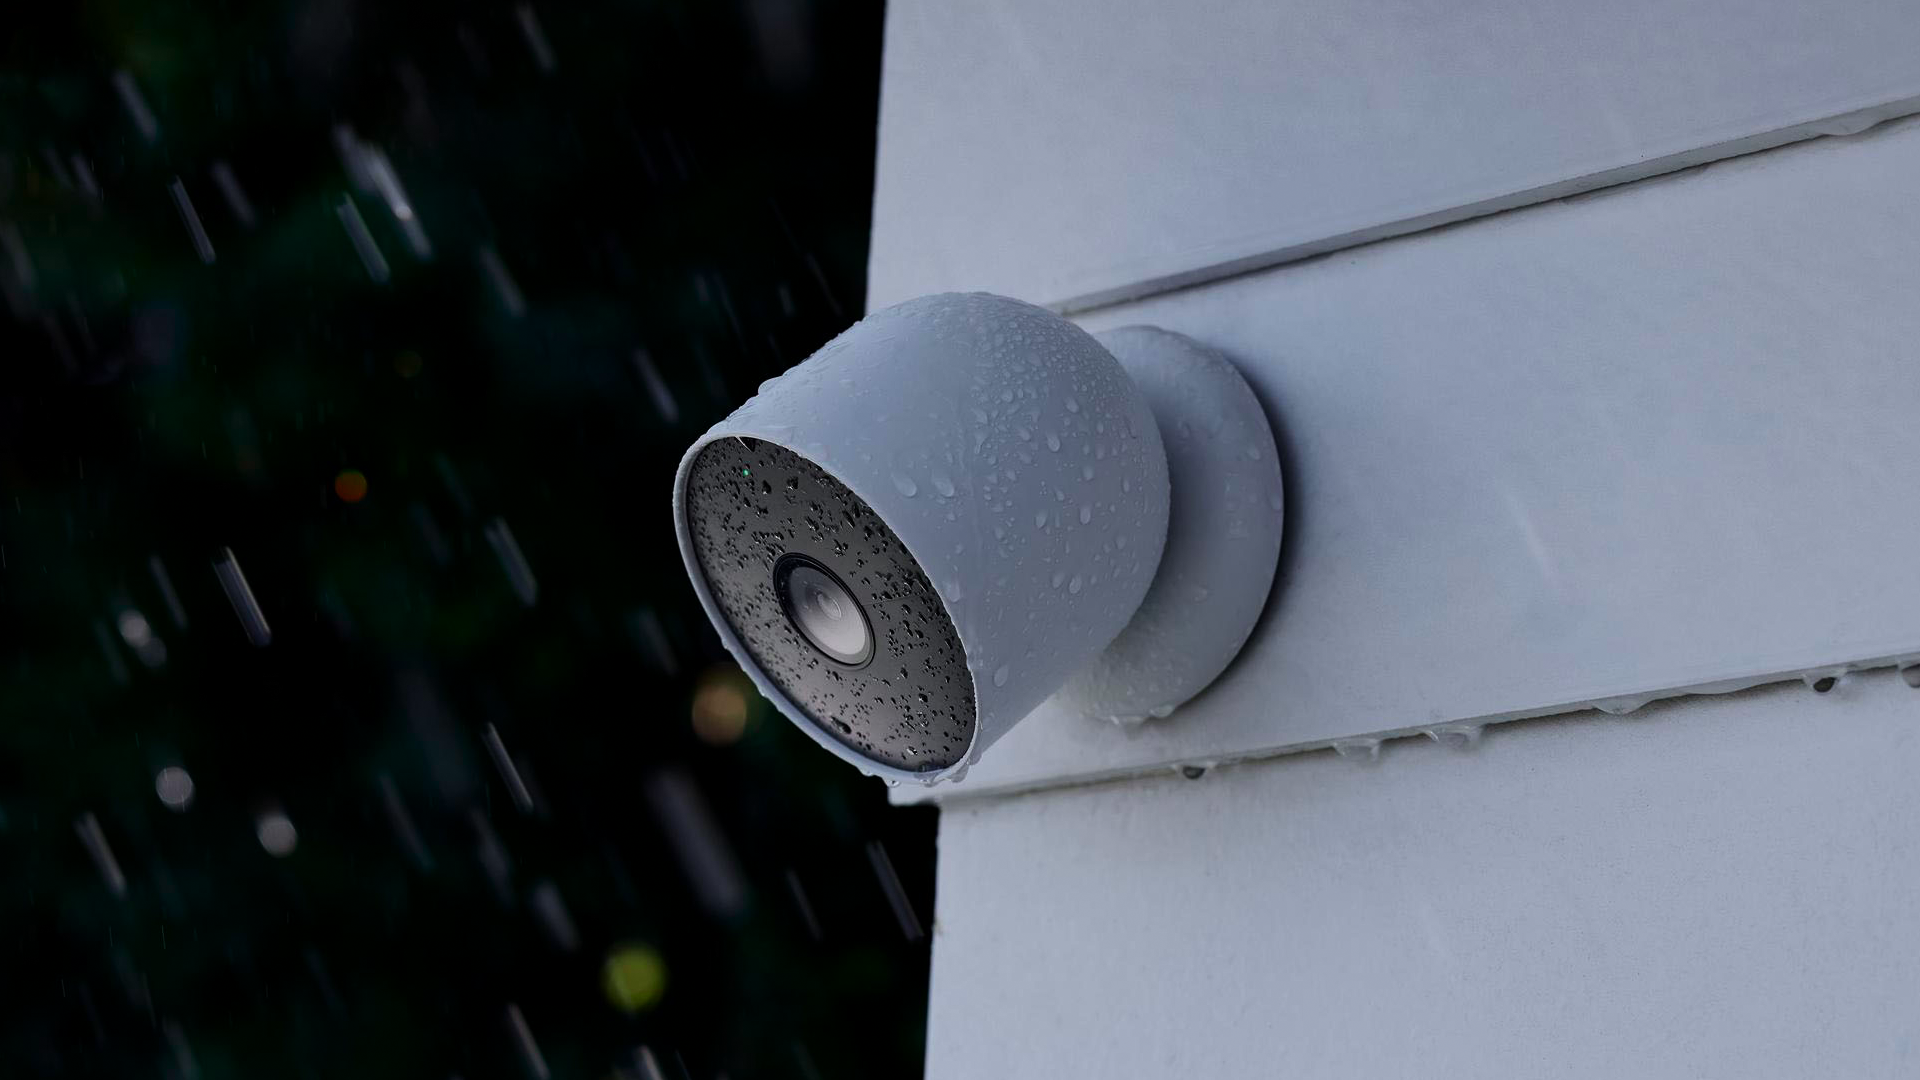 Google Confirms It’s Investigating Nest Doorbell and Camera Malfunctions